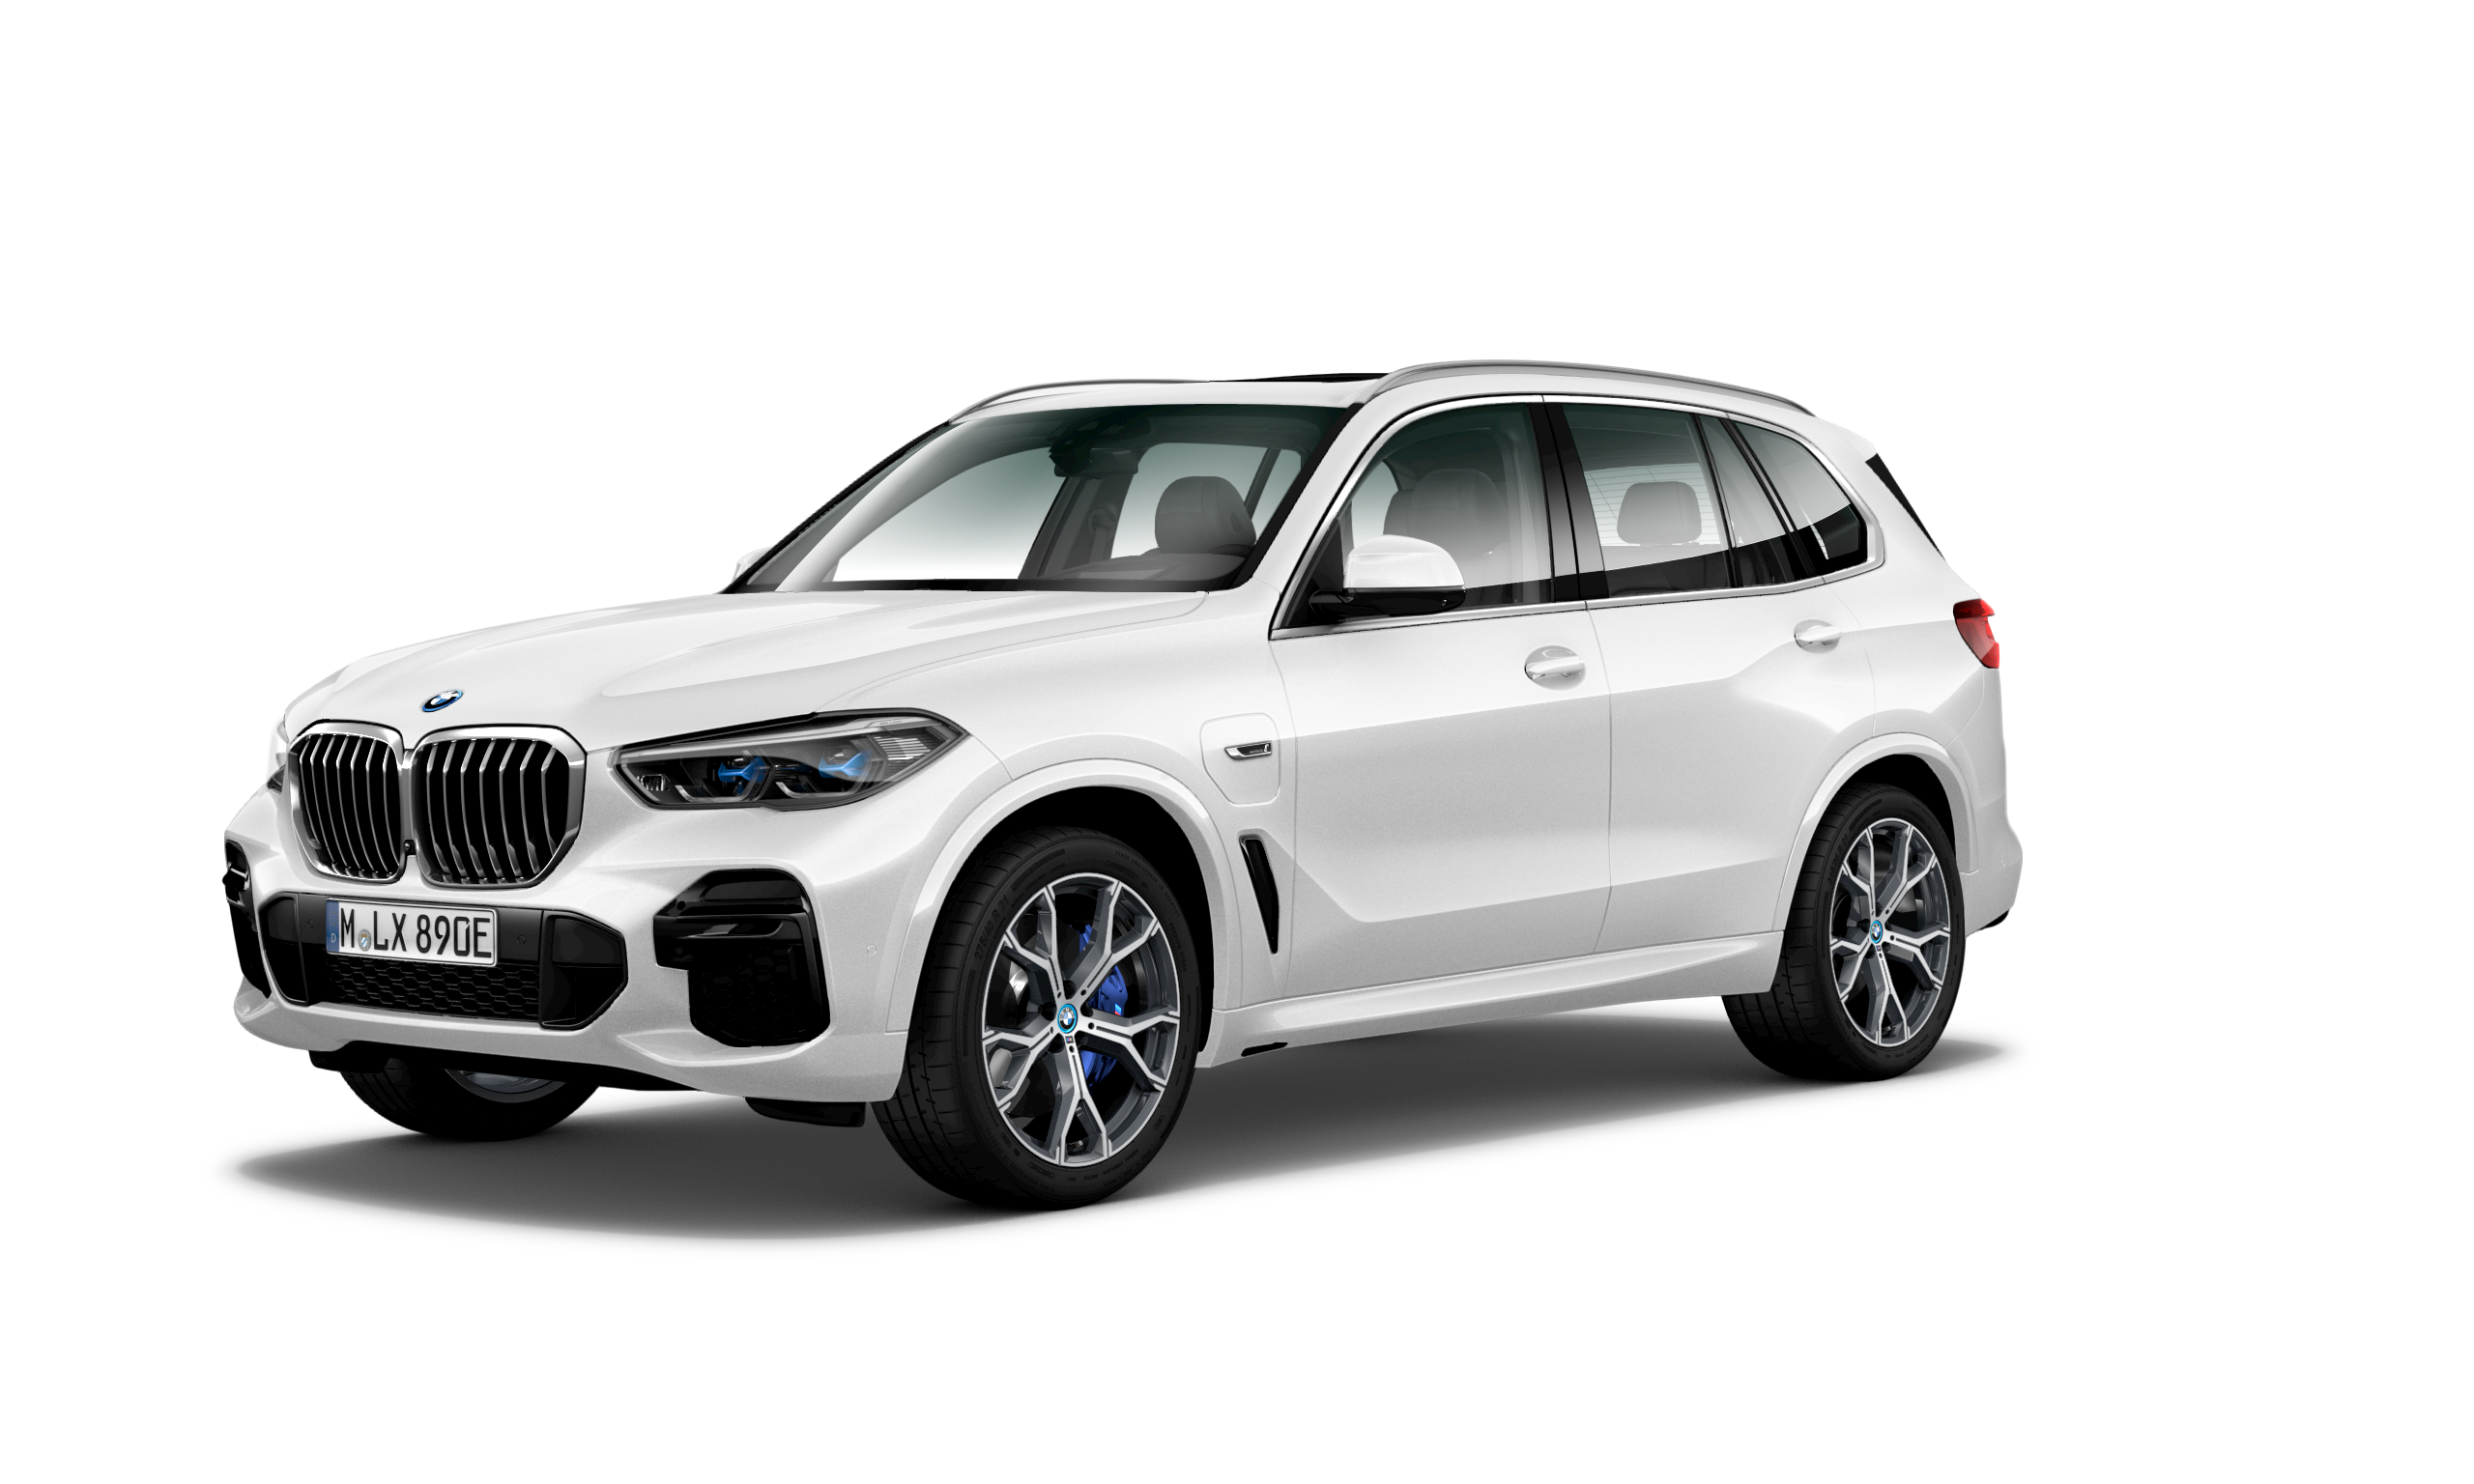 Price up by RM 6k for 2022 BMW X5 xDrive45e; updated with Laserlight, 8 airbags, 21" wheels